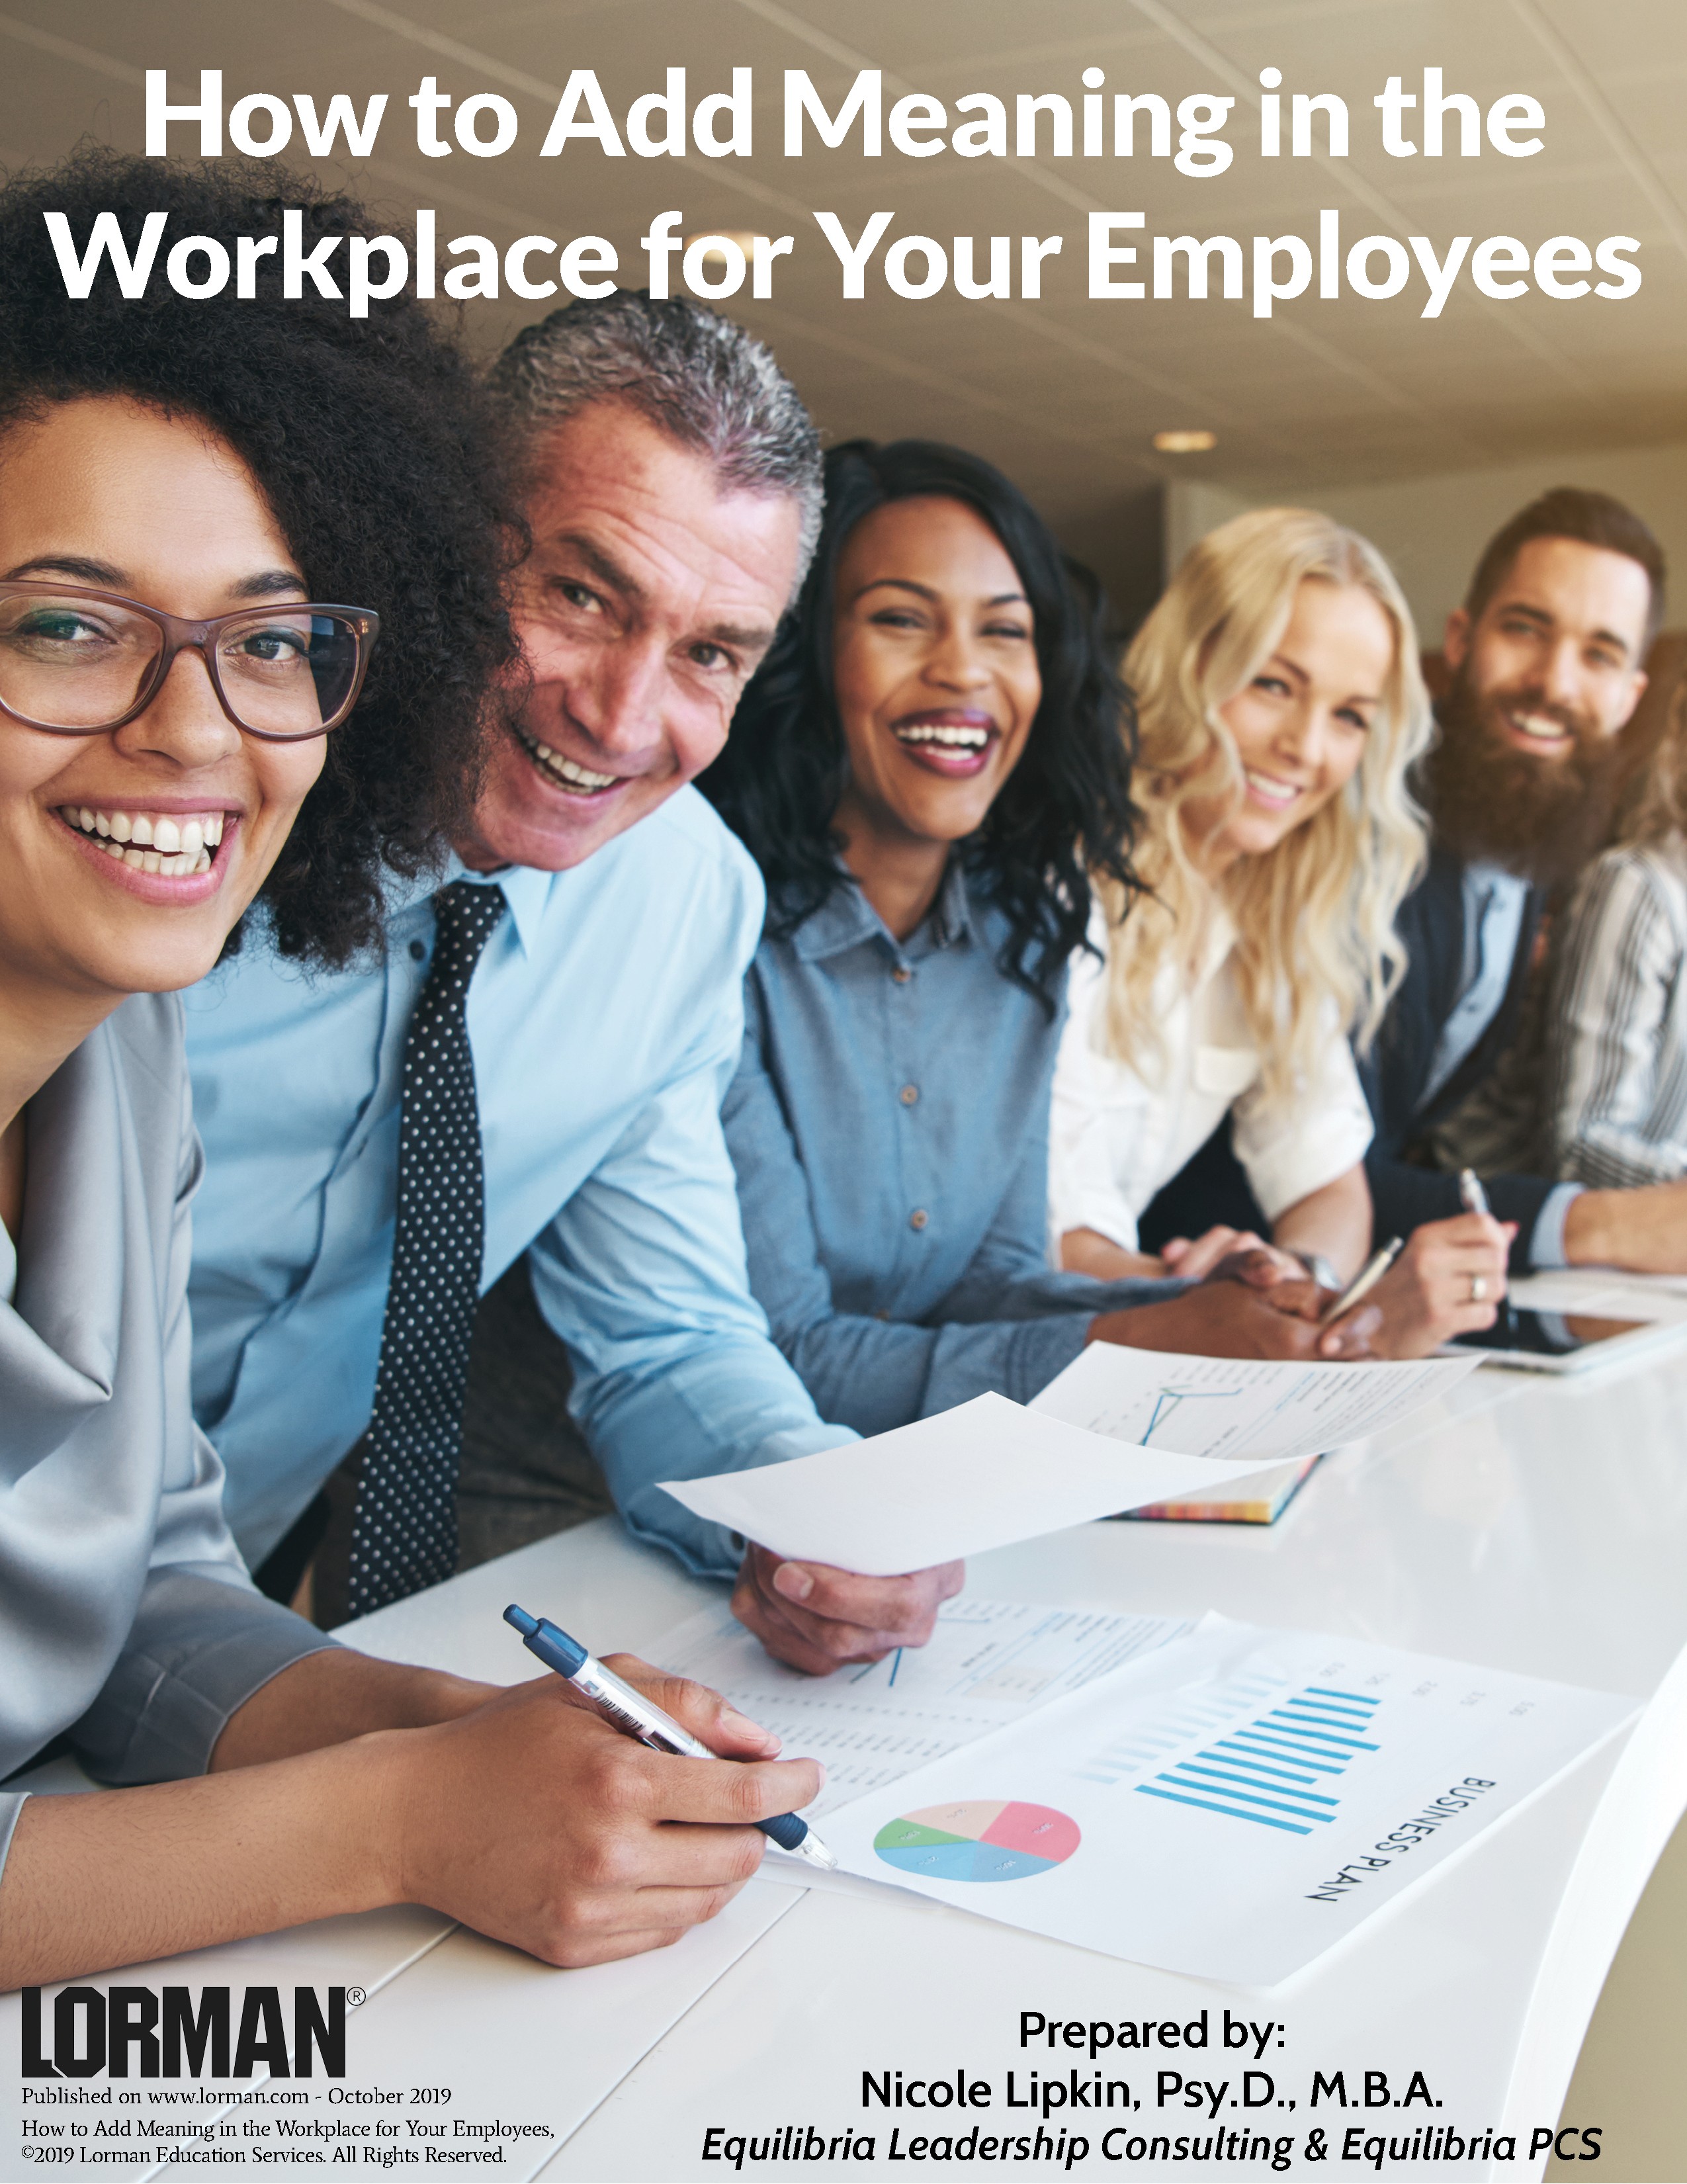 How to Add Meaning in the Workplace for Your Employees